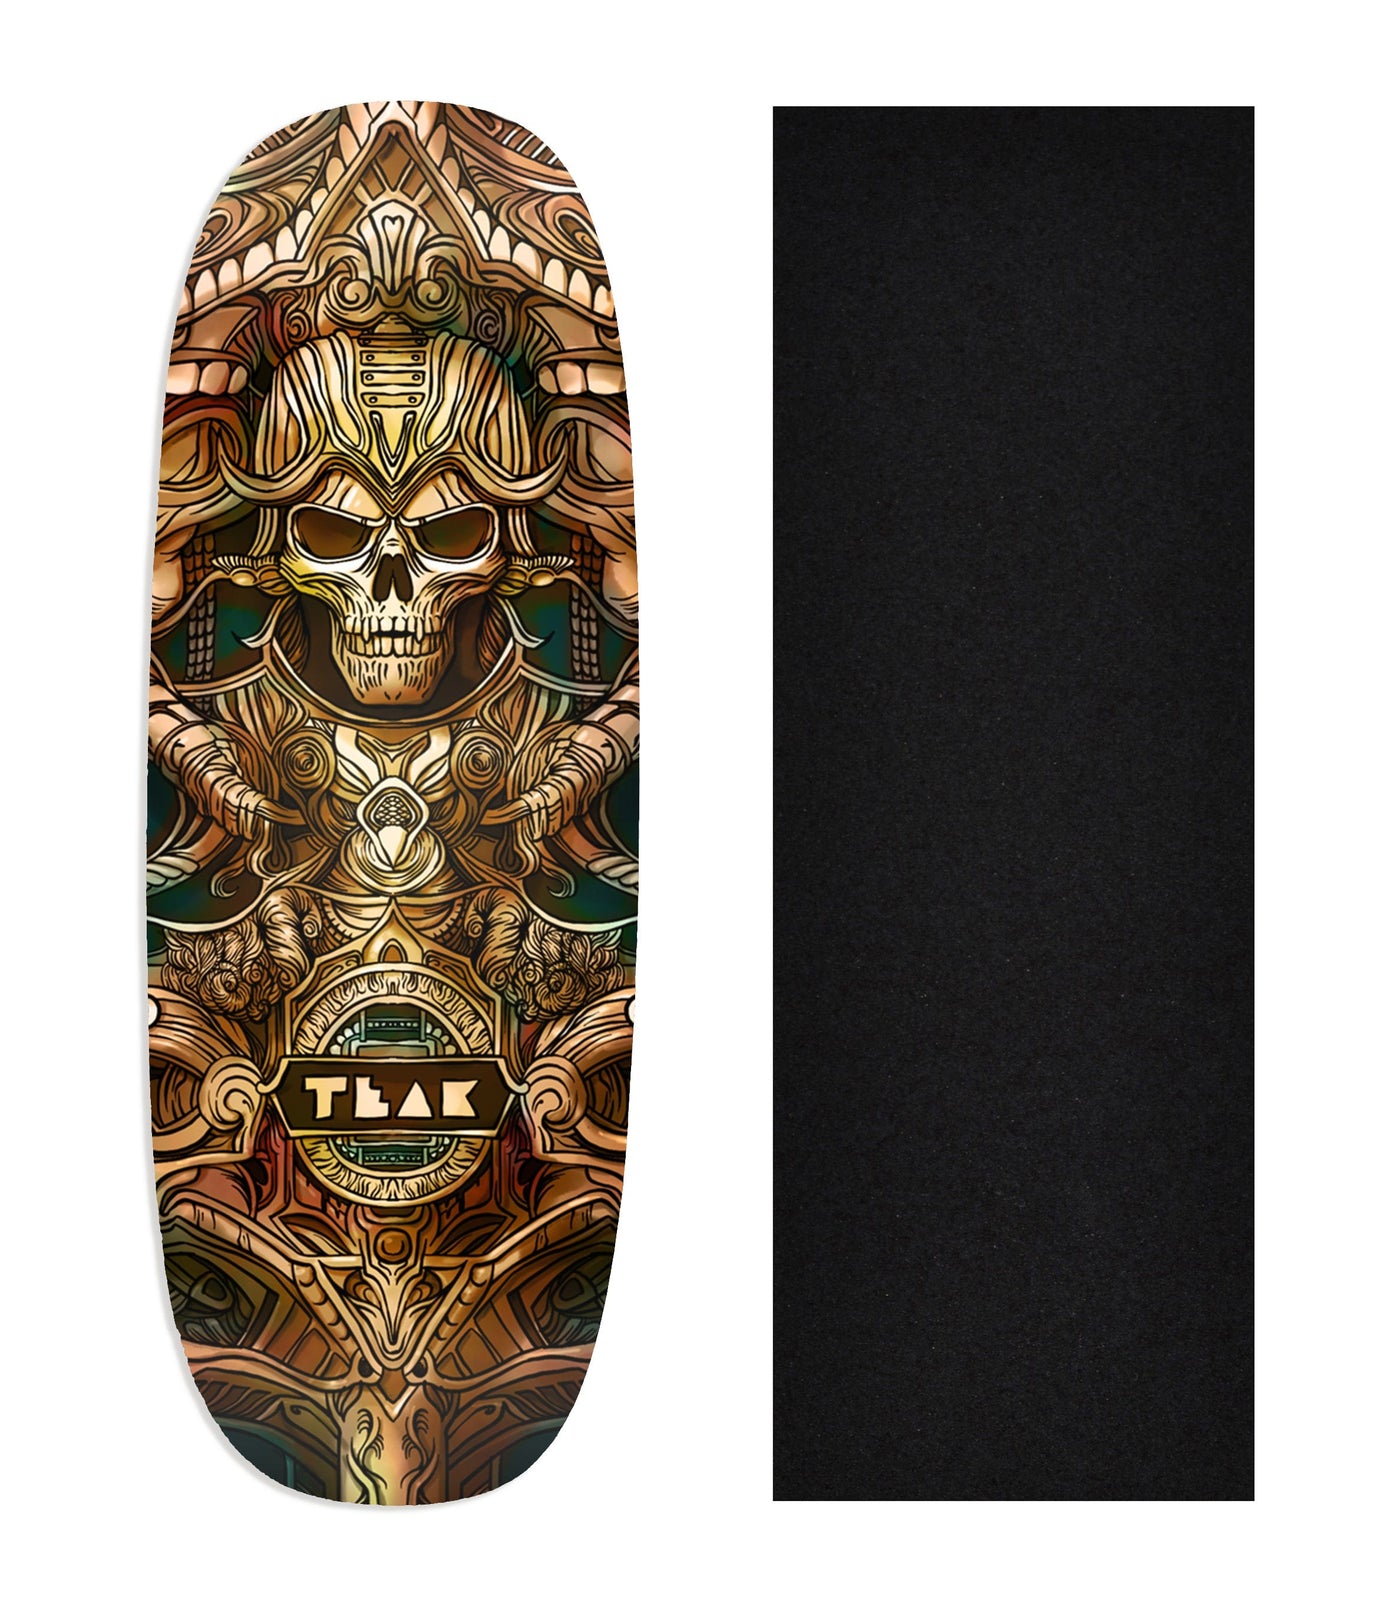 Teak Tuning Heat Transfer Graphic Wooden Fingerboard Deck, "Ancient Ruins" Ohhh Deck